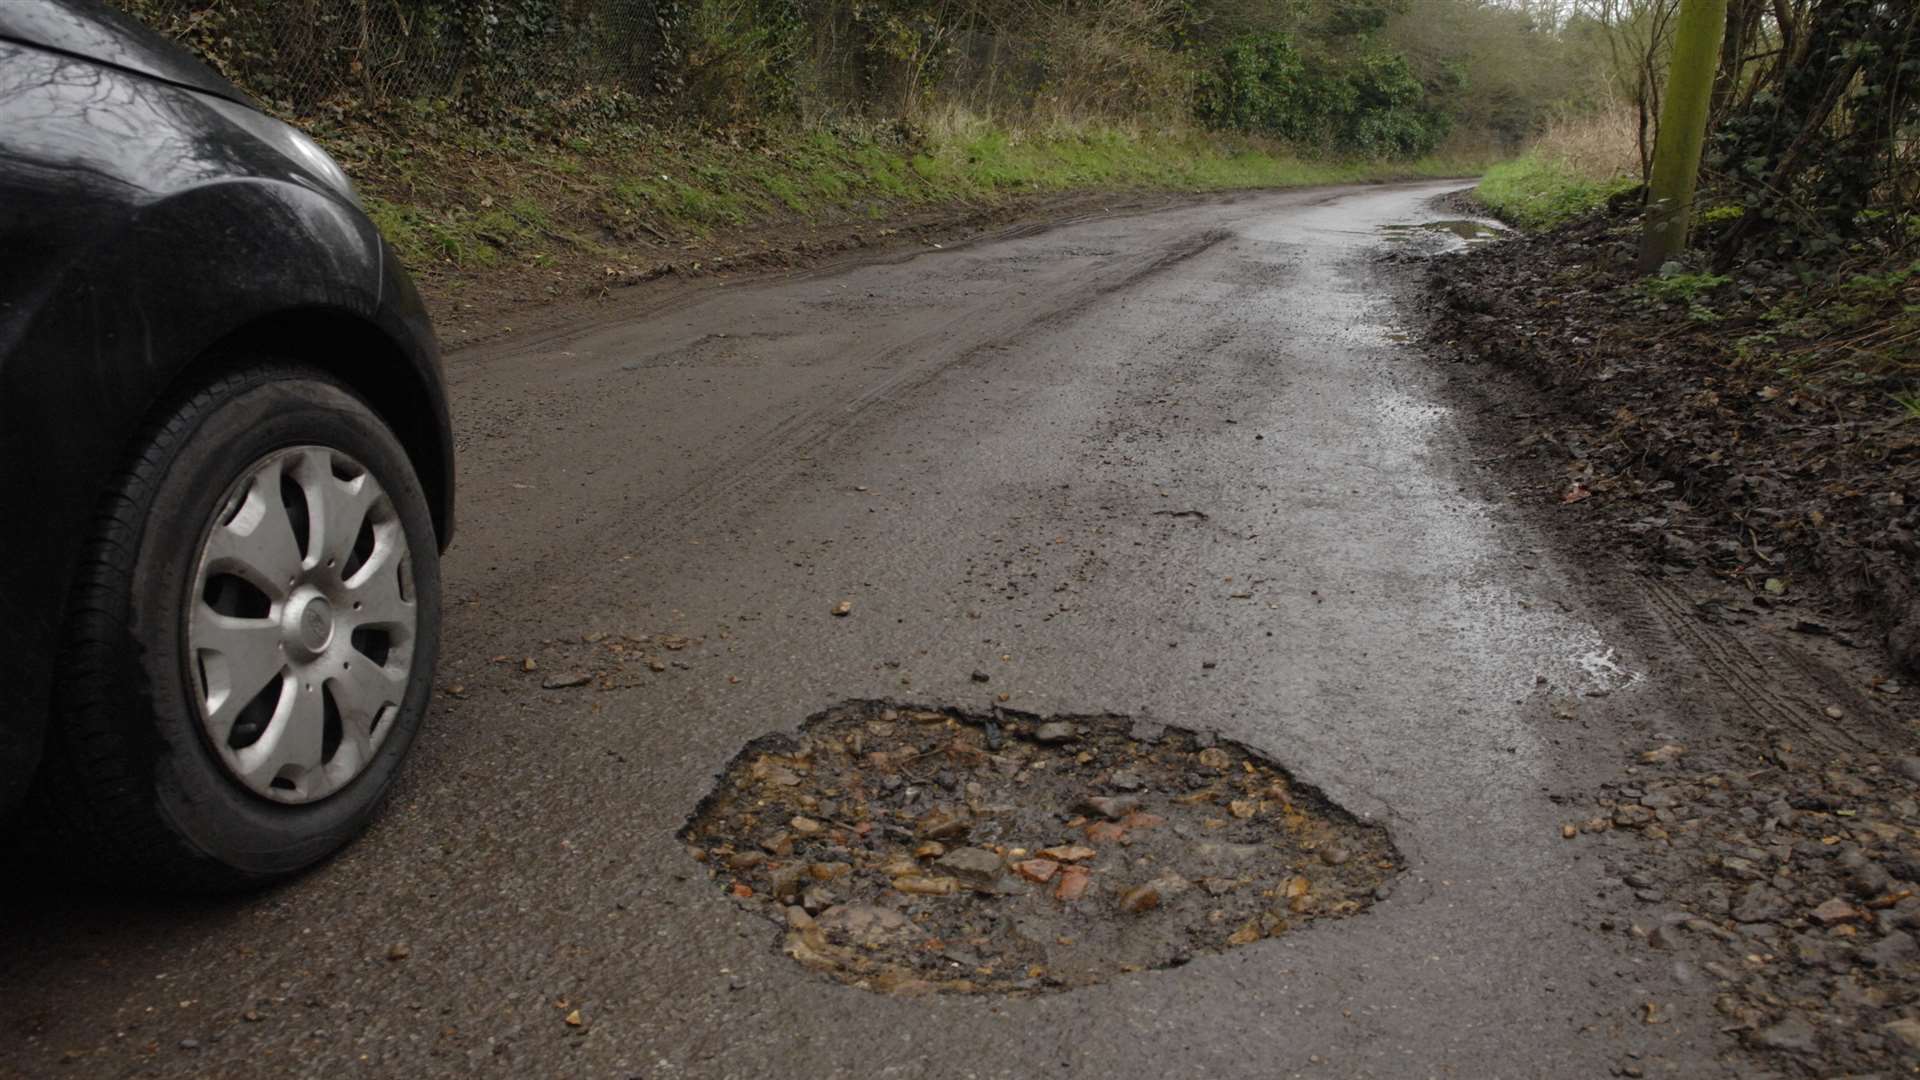 KCC have been criticised for letting Canterbury's roads slip into a "medieval" state of disrepair.